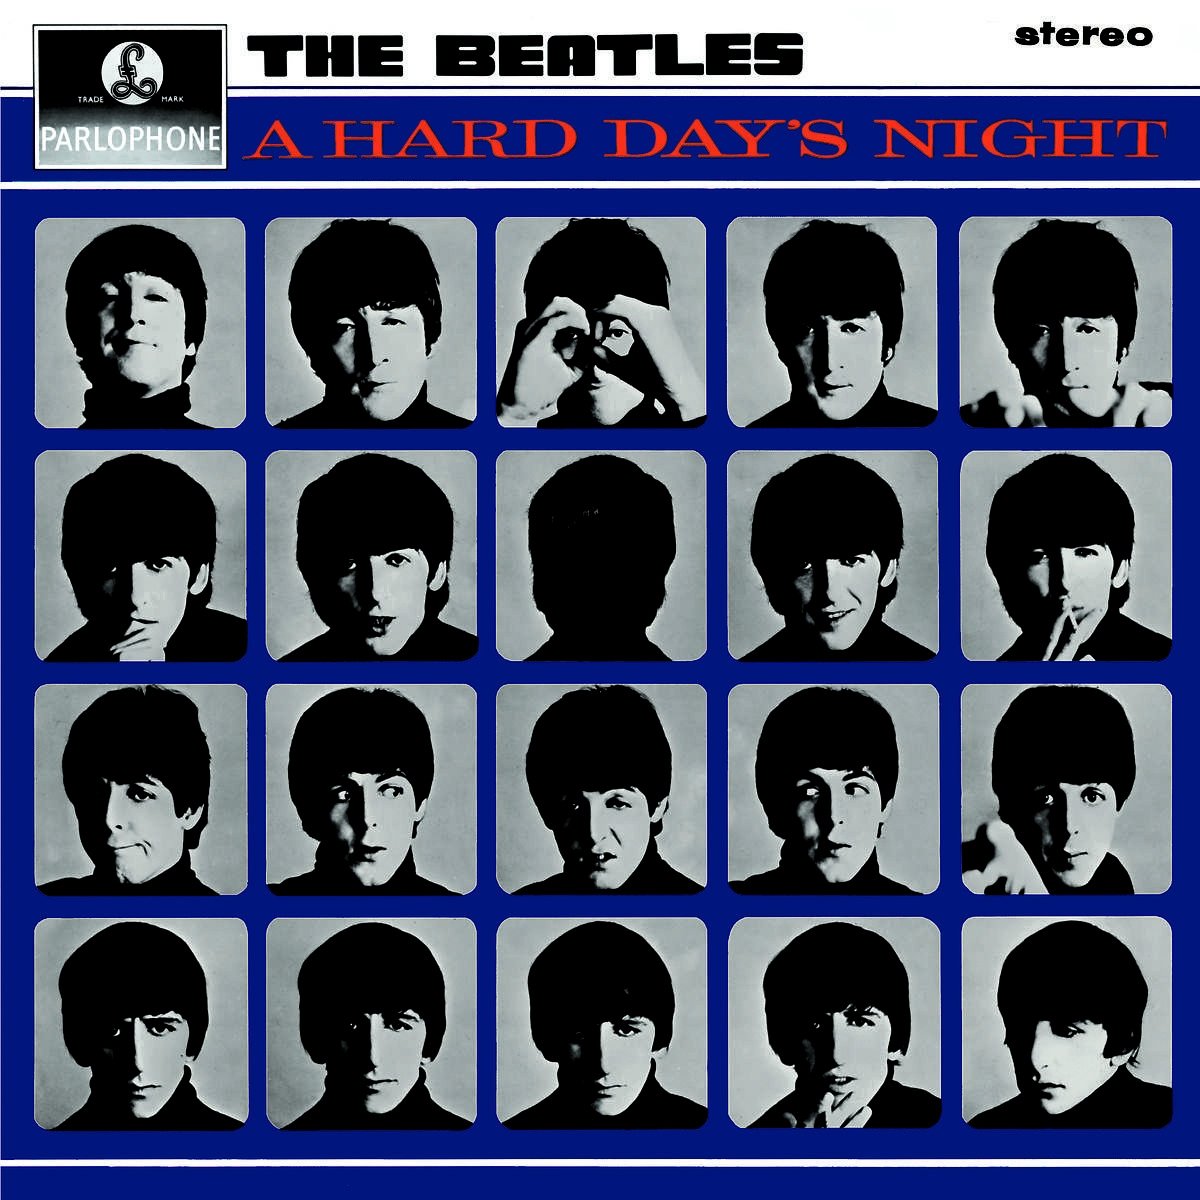 The Beatles-A Hard Days Night-REMASTERED-CD-FLAC-2009-FiXIE